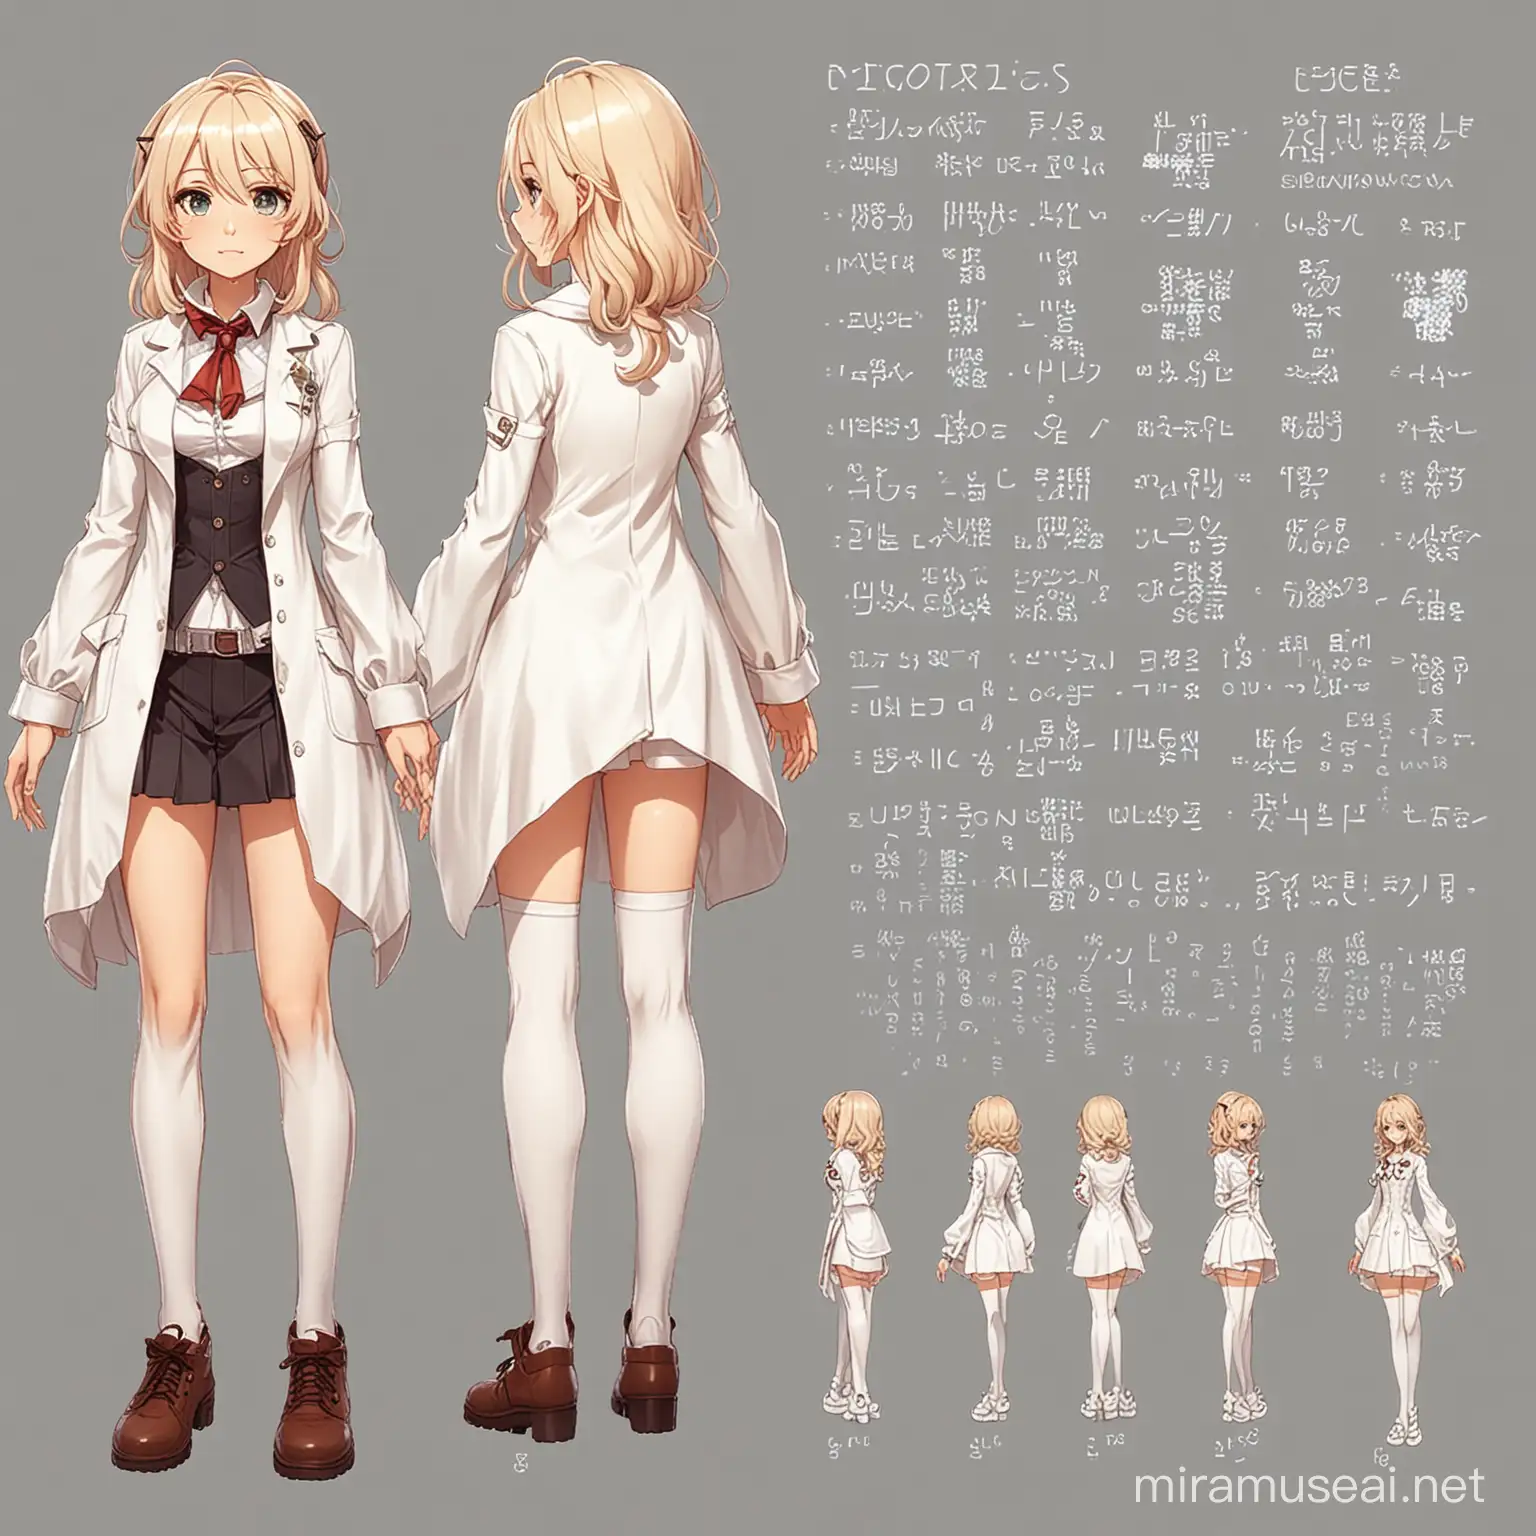 Cute Anime Scientist Girl in Light Outfit Character Design Sheet